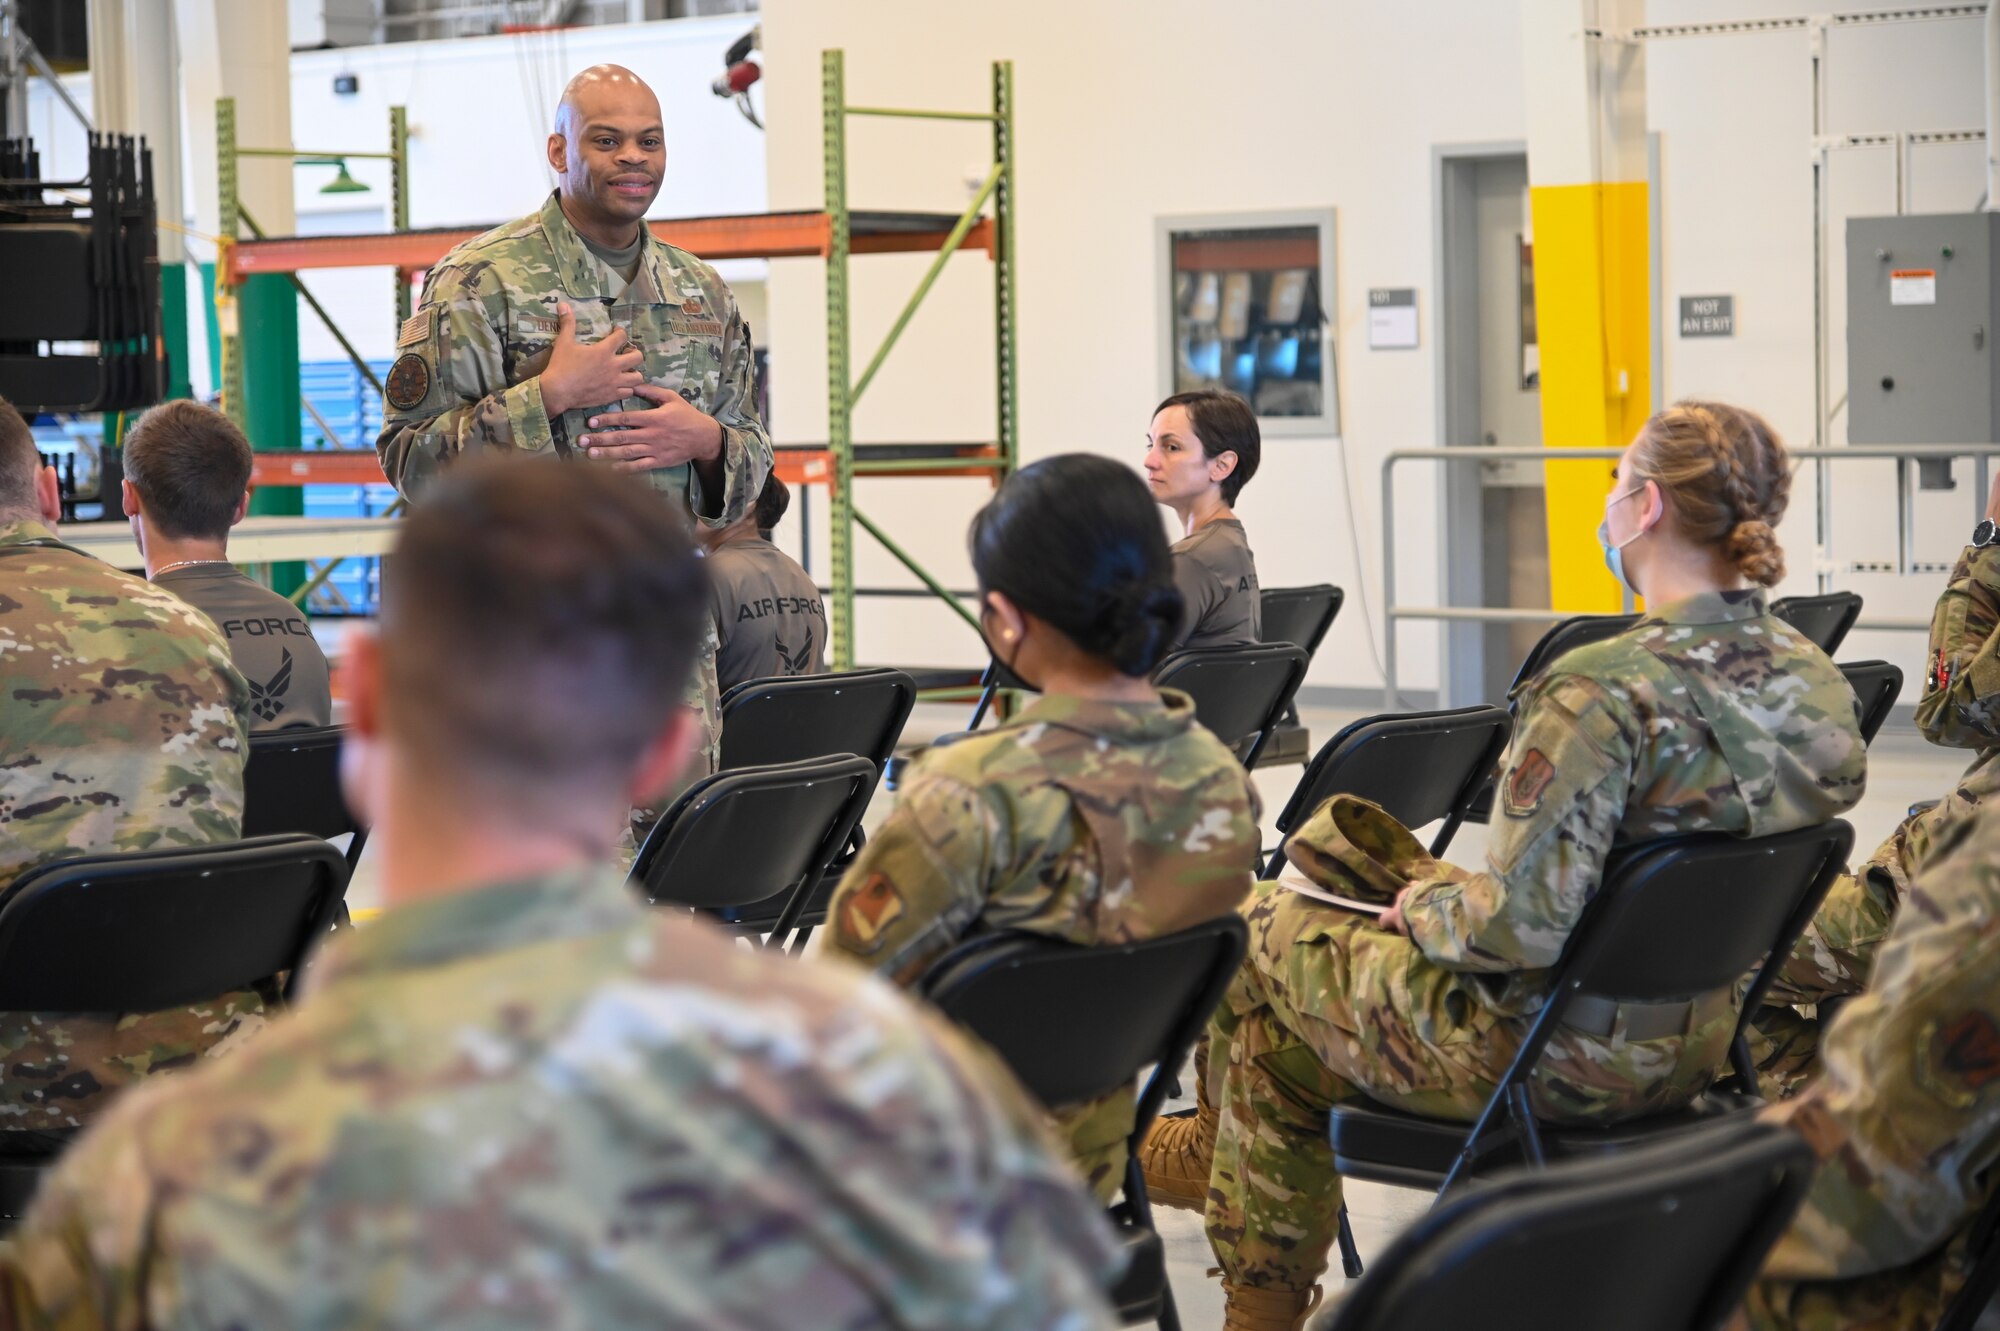 Chief Master Sgt. Travon W. Dennis, command first sergeant, Air Force Reserve Command, Robins Air Force Base, Georgia, speaks with Airmen at an E-4 and Below meeting June 13, 2021, at Beale AFB, California.